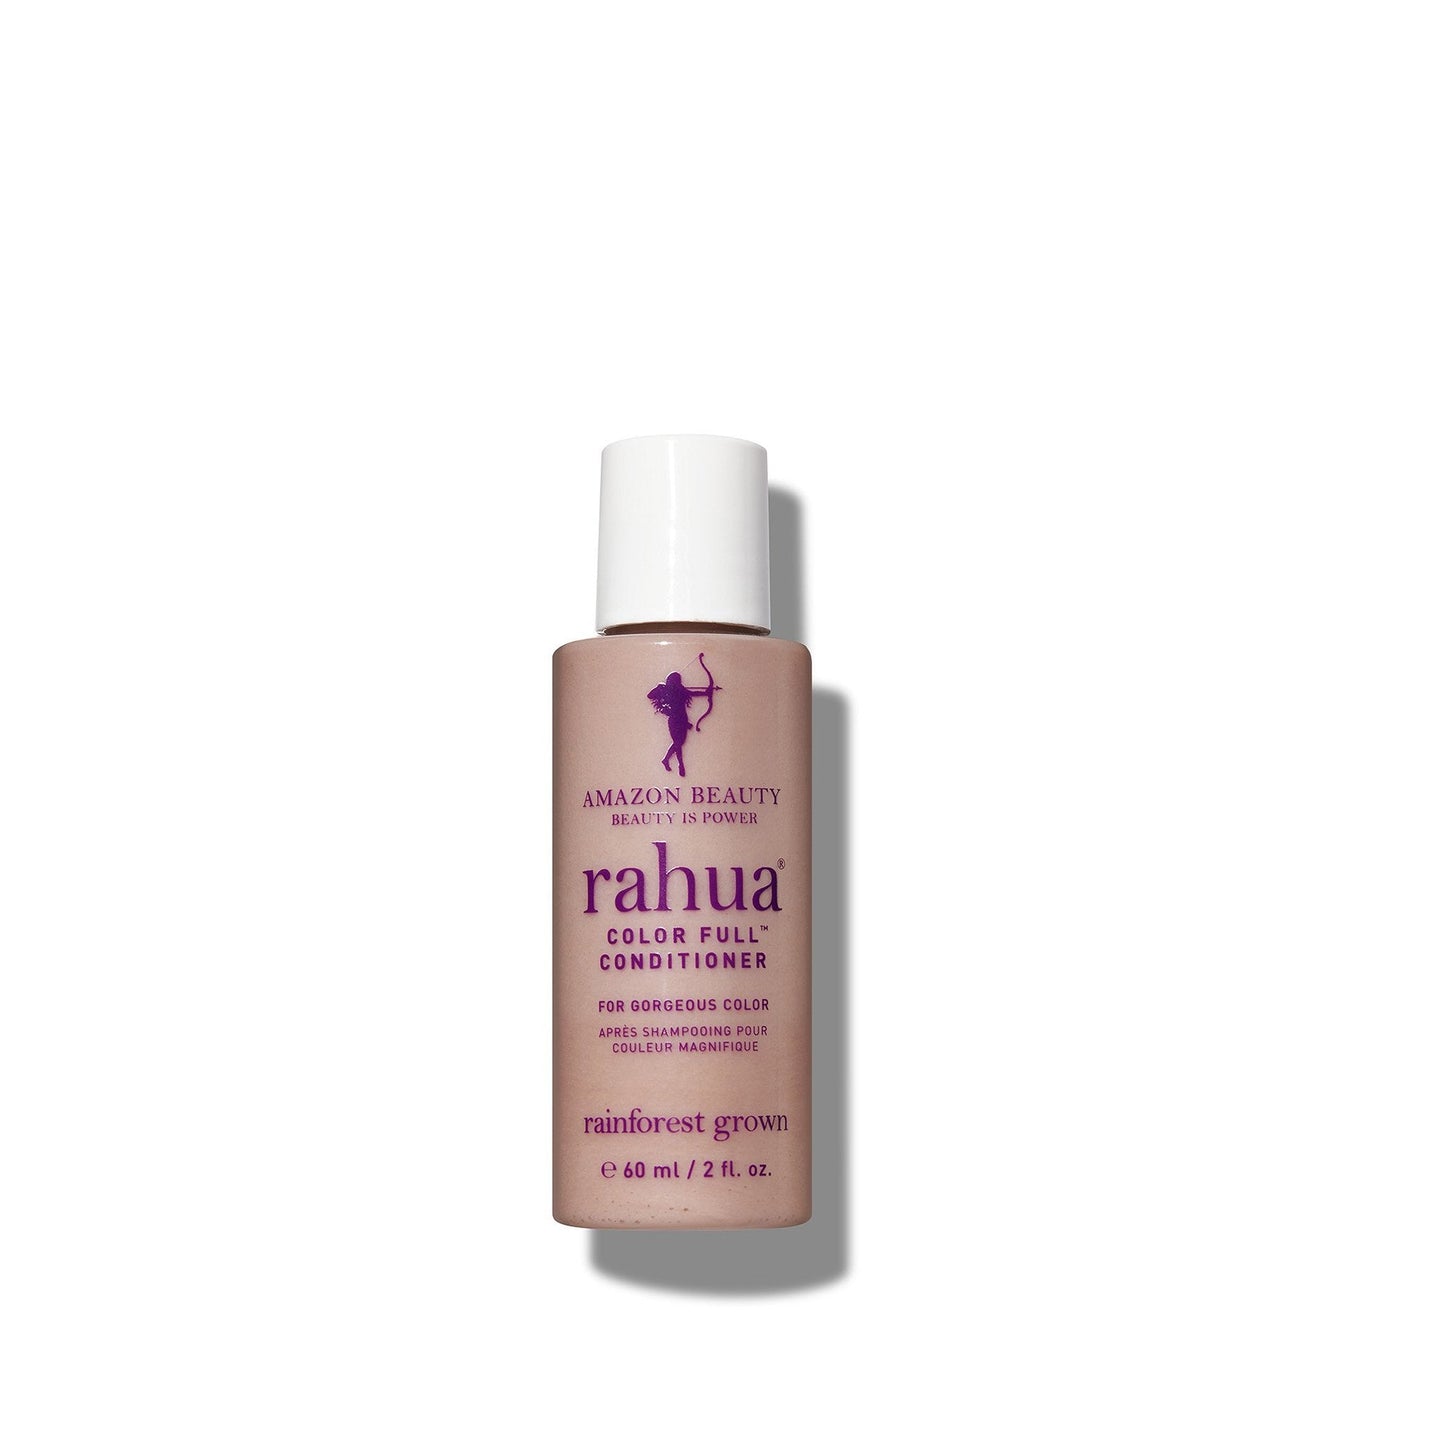 Rahua color full conditioner travel size